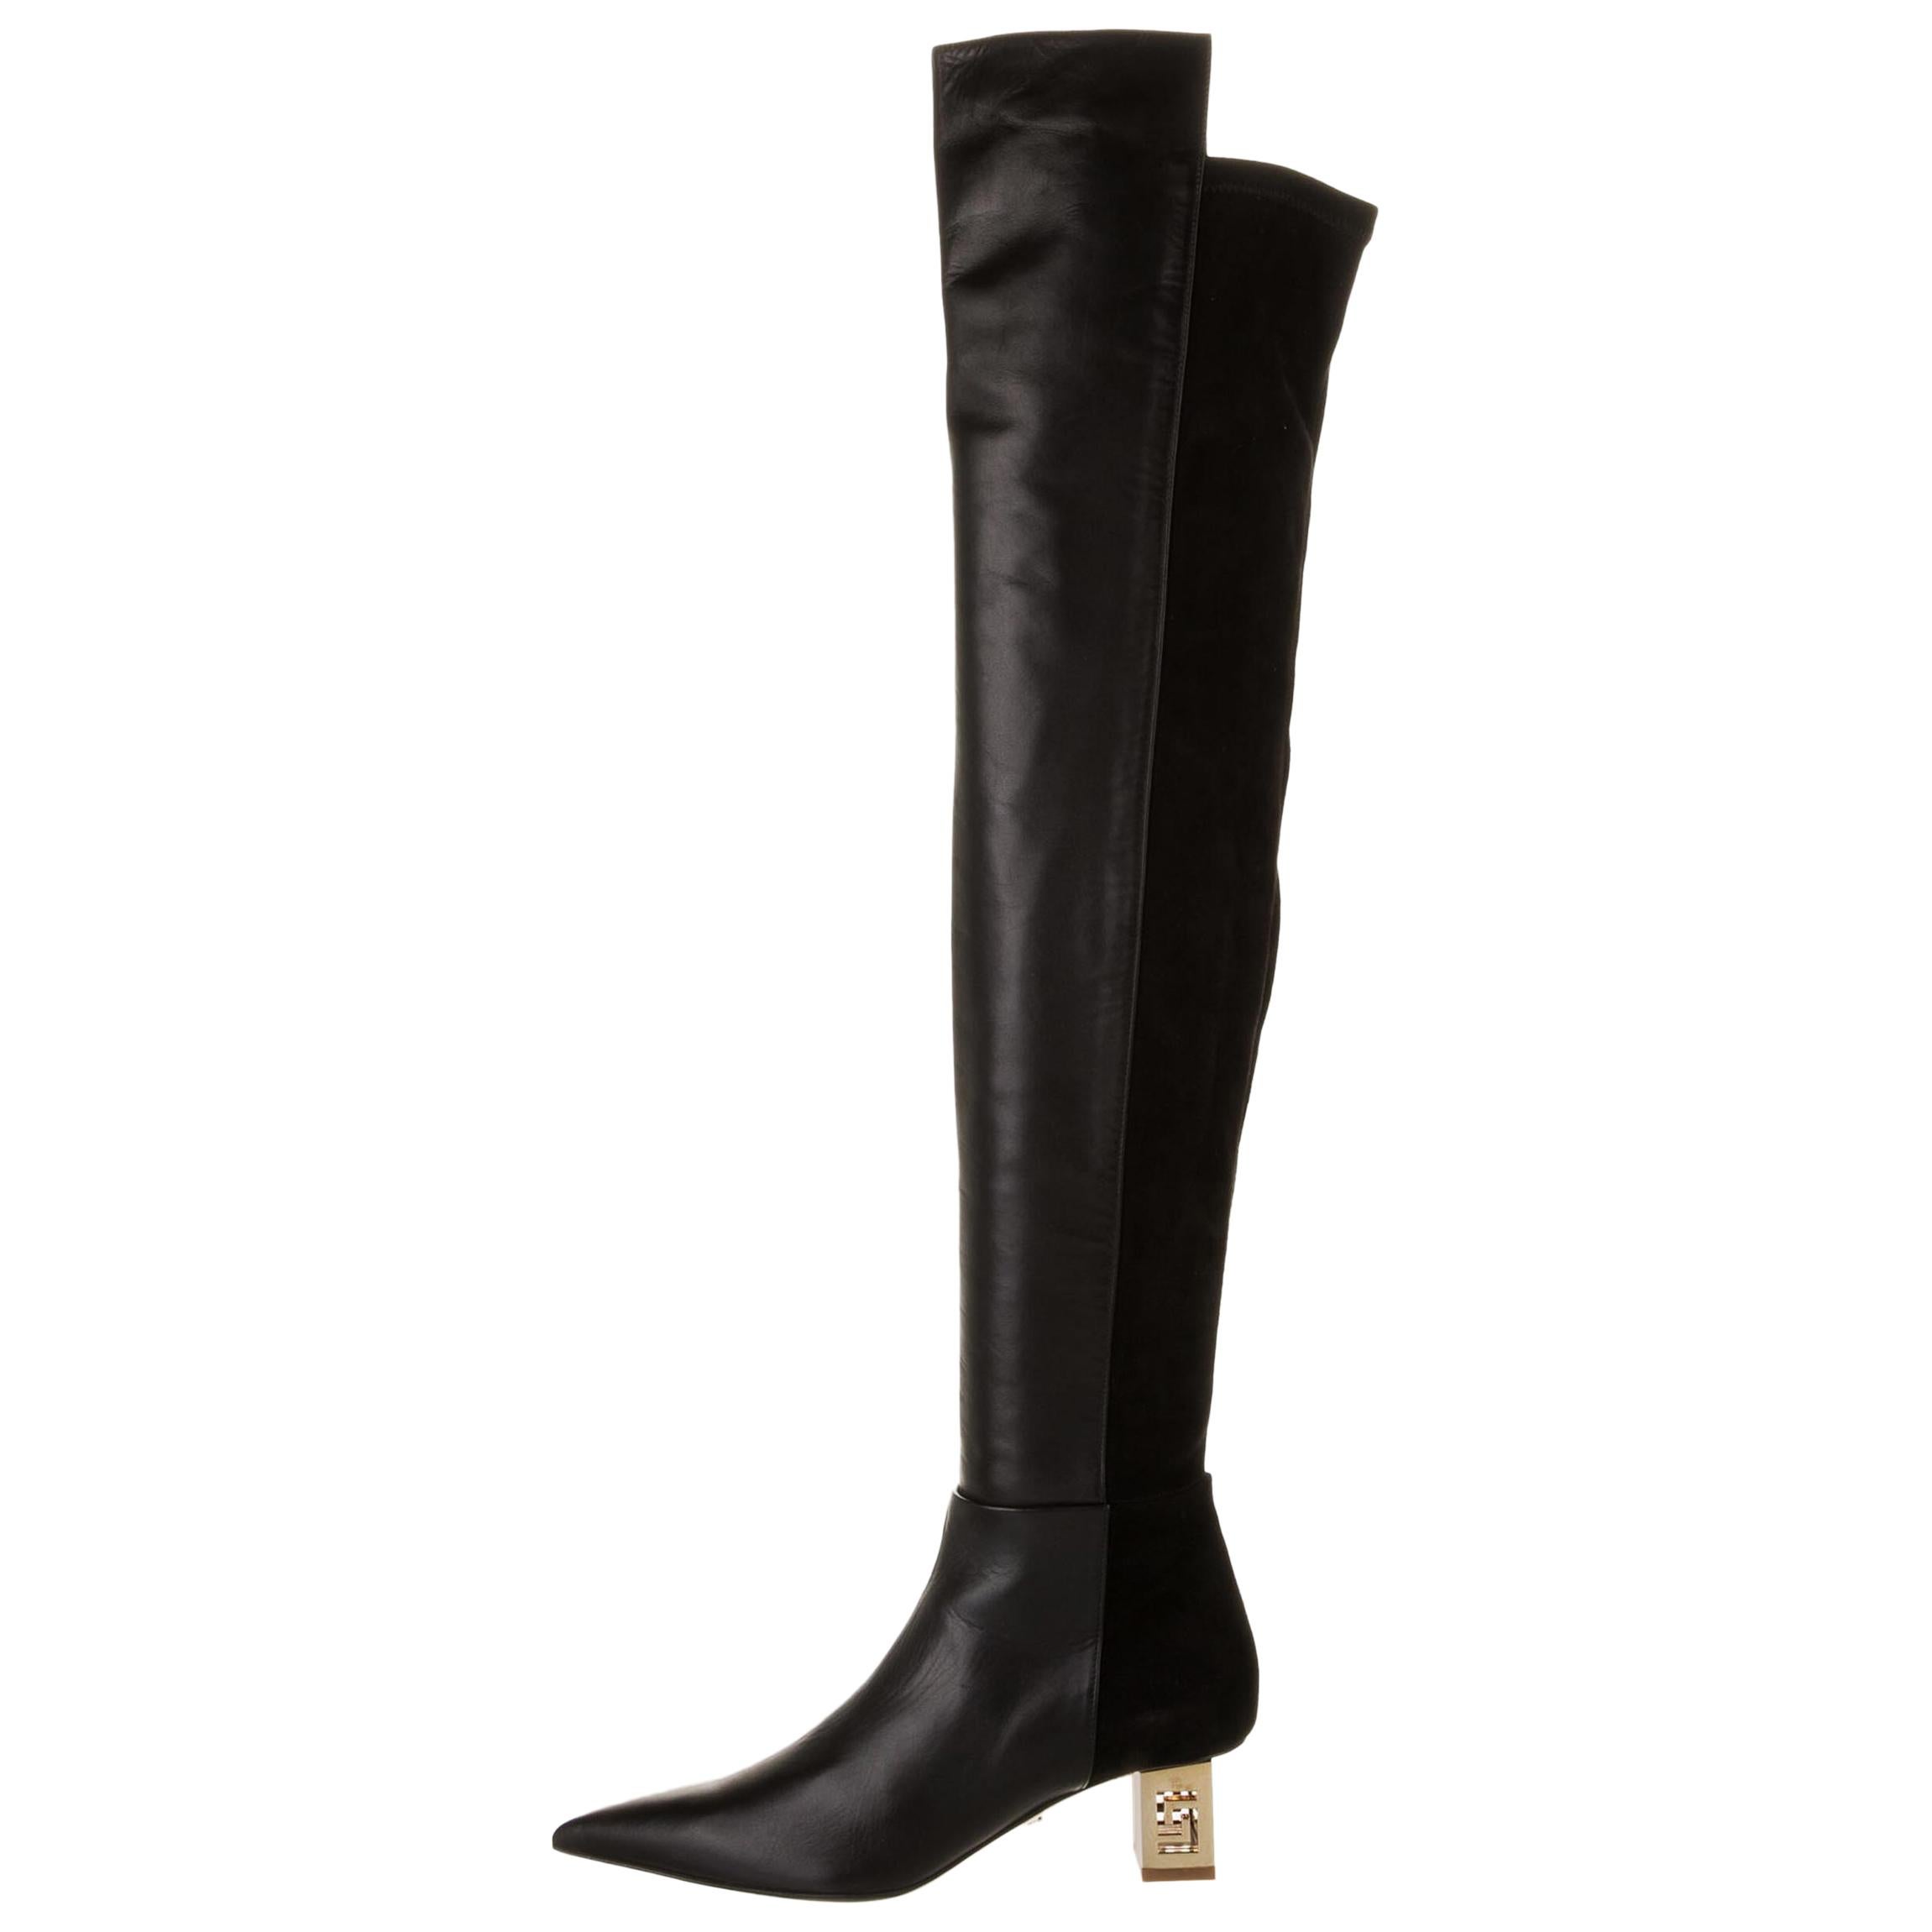 New Versace Black Leather Suede Greek Key Gold Tone Heel Over Knee Boots 38 & 39